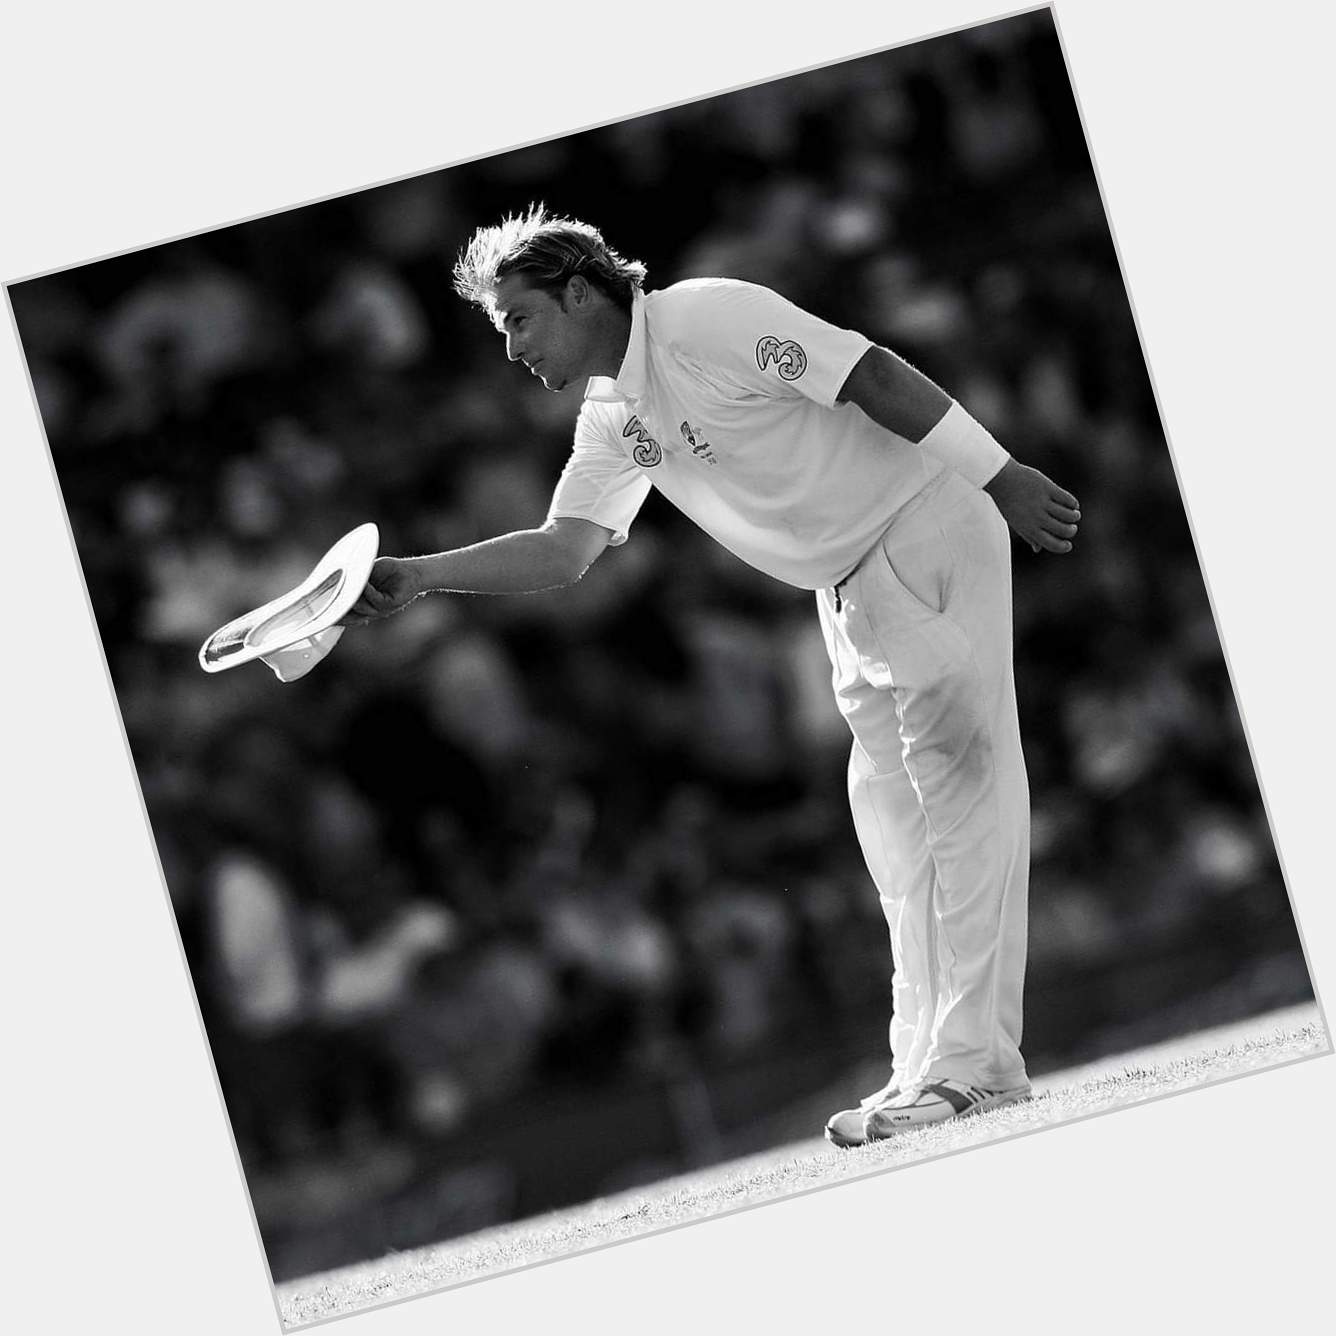 Happy Heavenly Birthday to the late, great Shane Warne - missed so much              